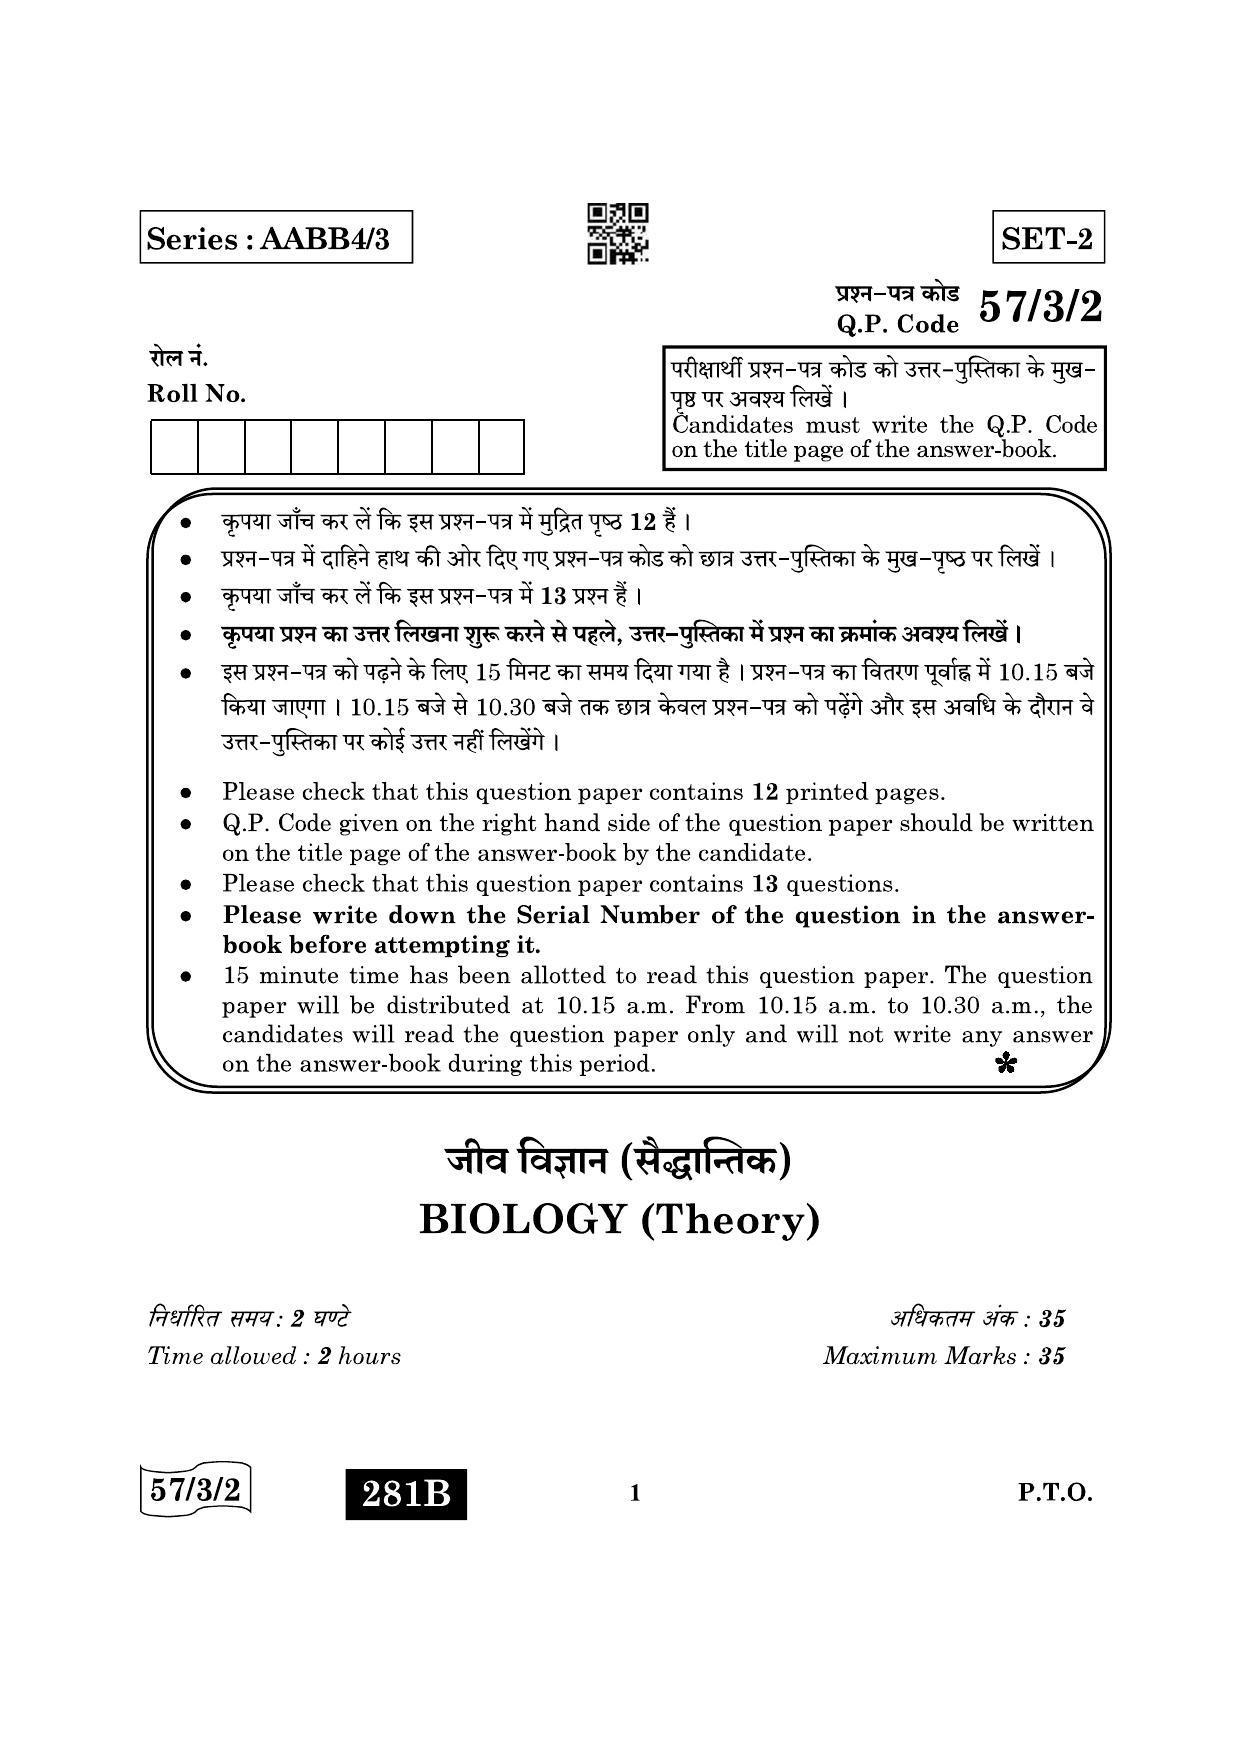 CBSE Class 12 57-3-2 Biology 2022 Question Paper - Page 1